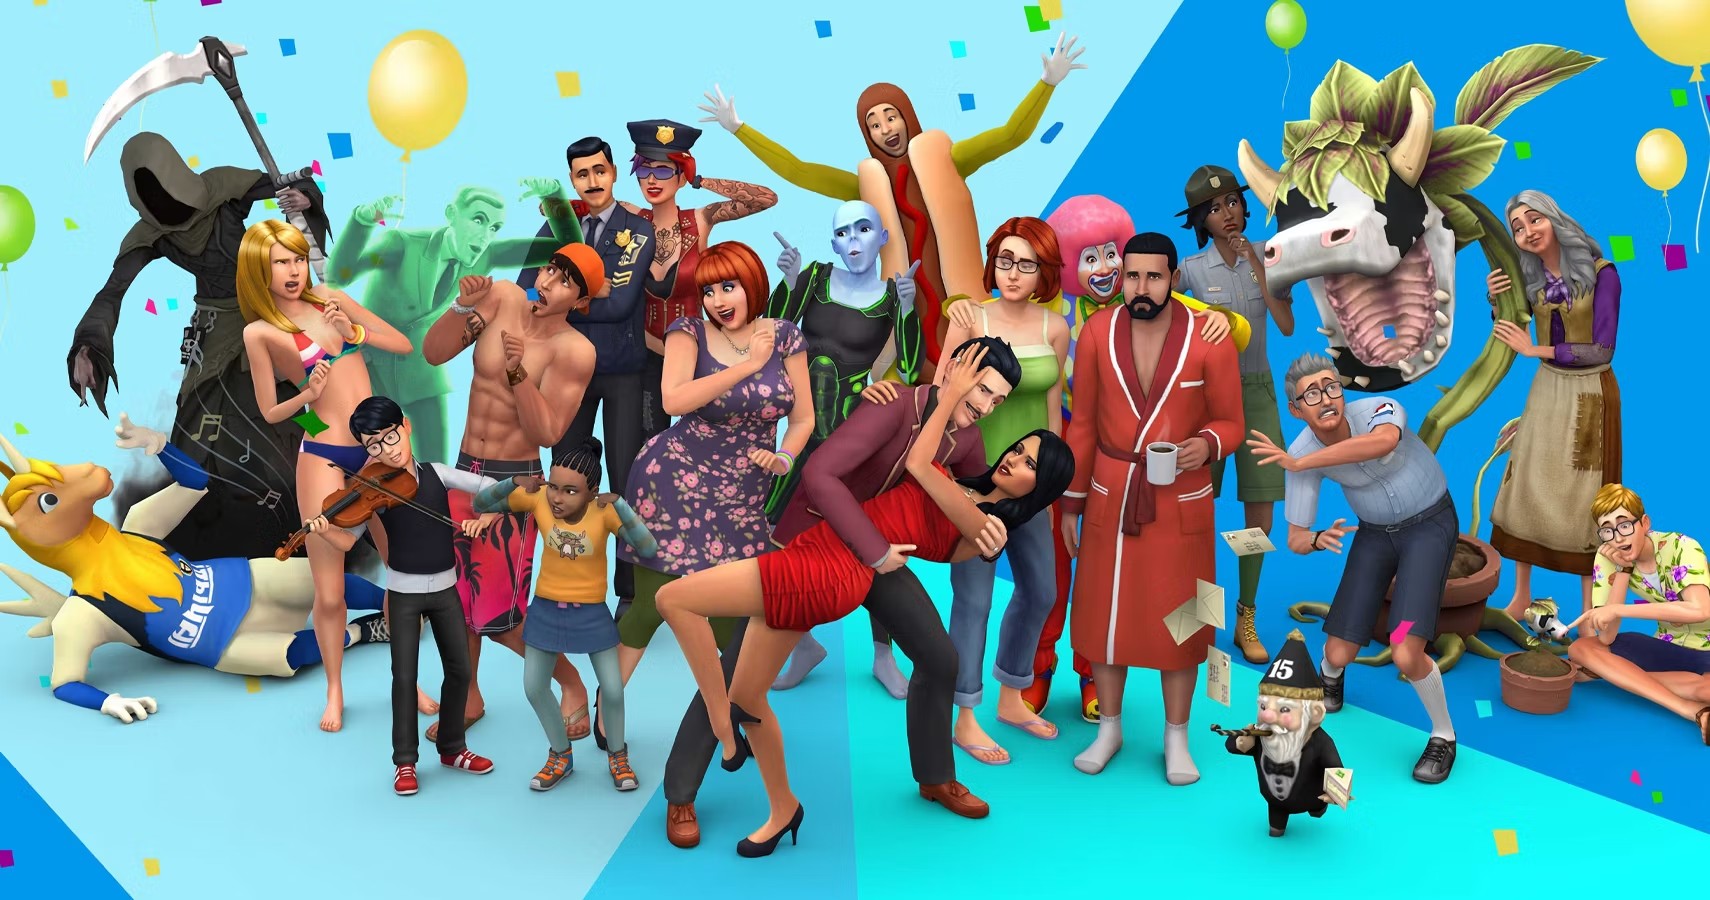 Base version of The Sims 4 will become free-to-play beginning in October -  Meristation